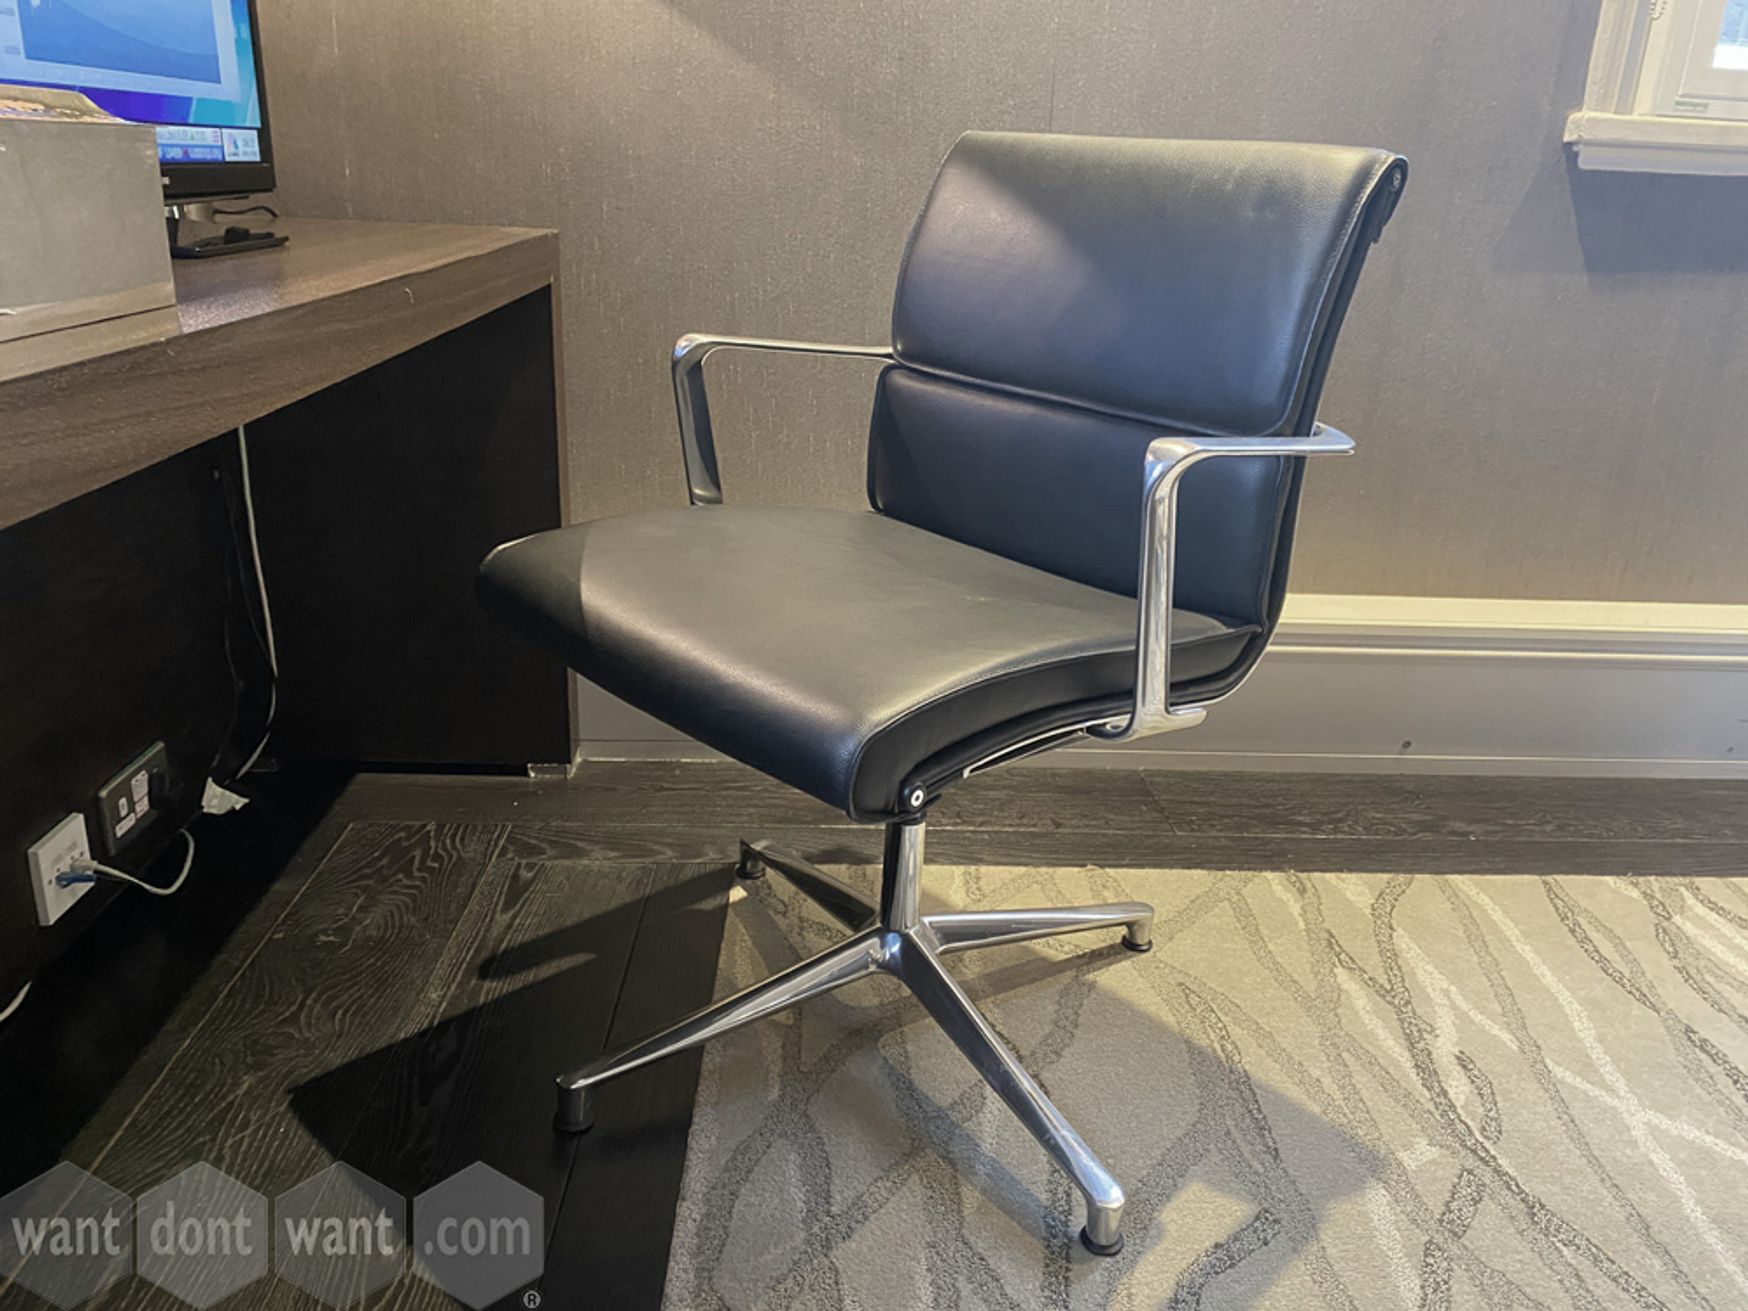 Used ICF black leather meeting chair on glides. Immaculate condition. 